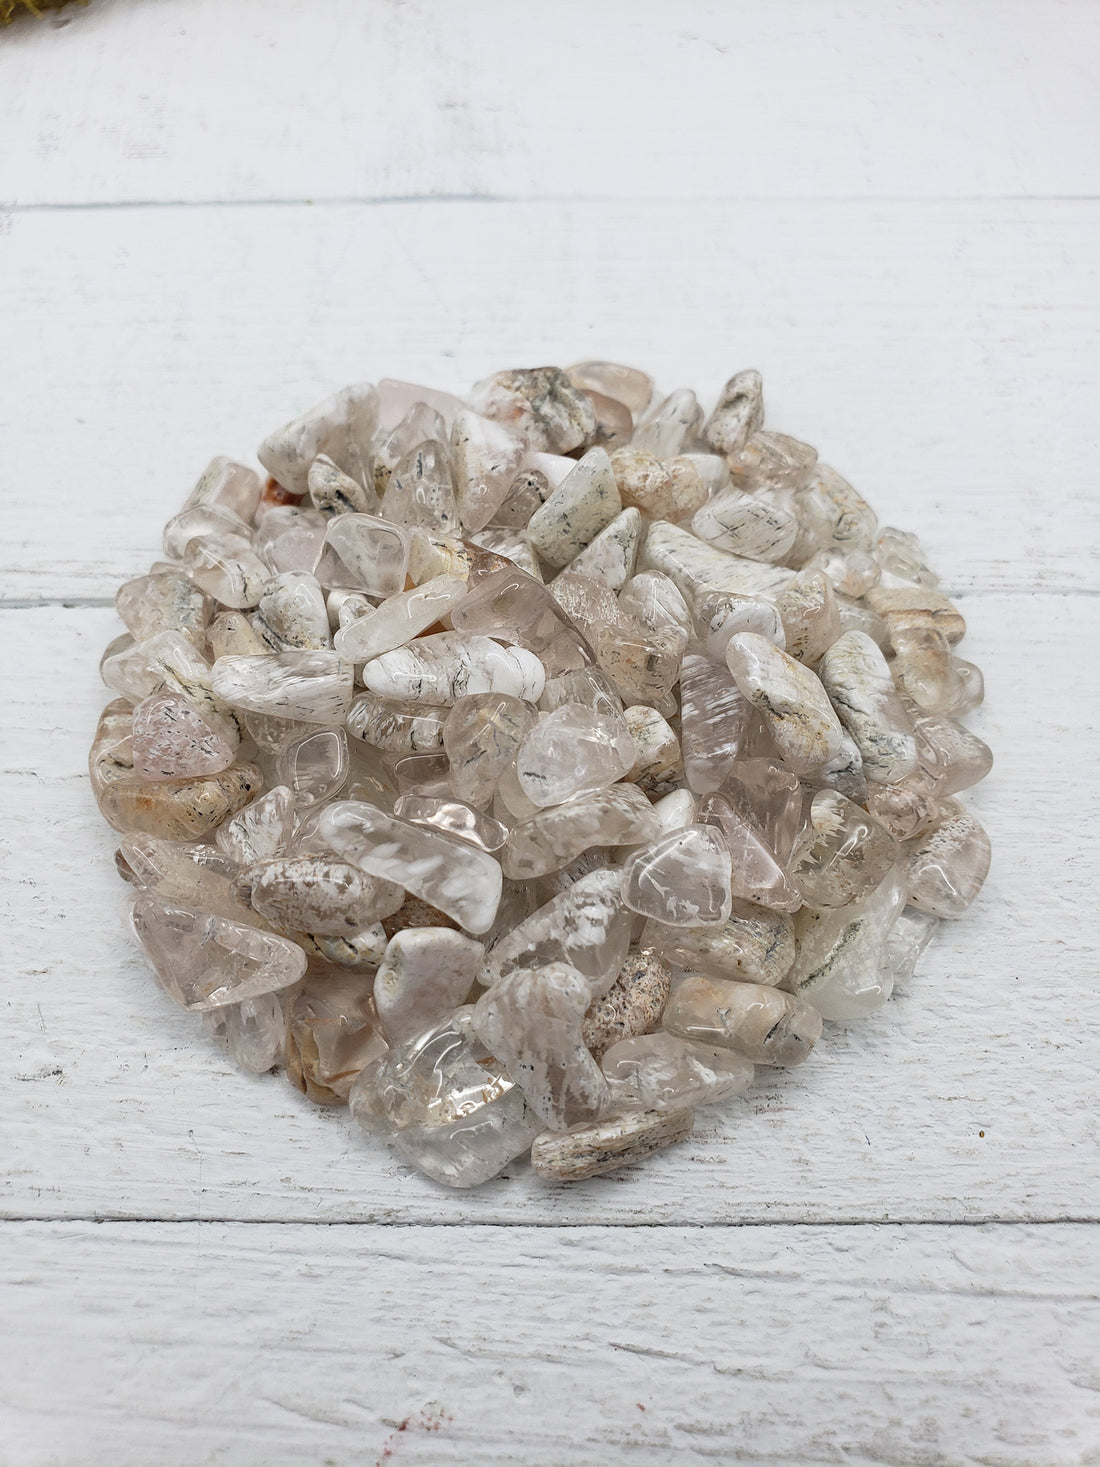 2 ounces of lodolite chips on display